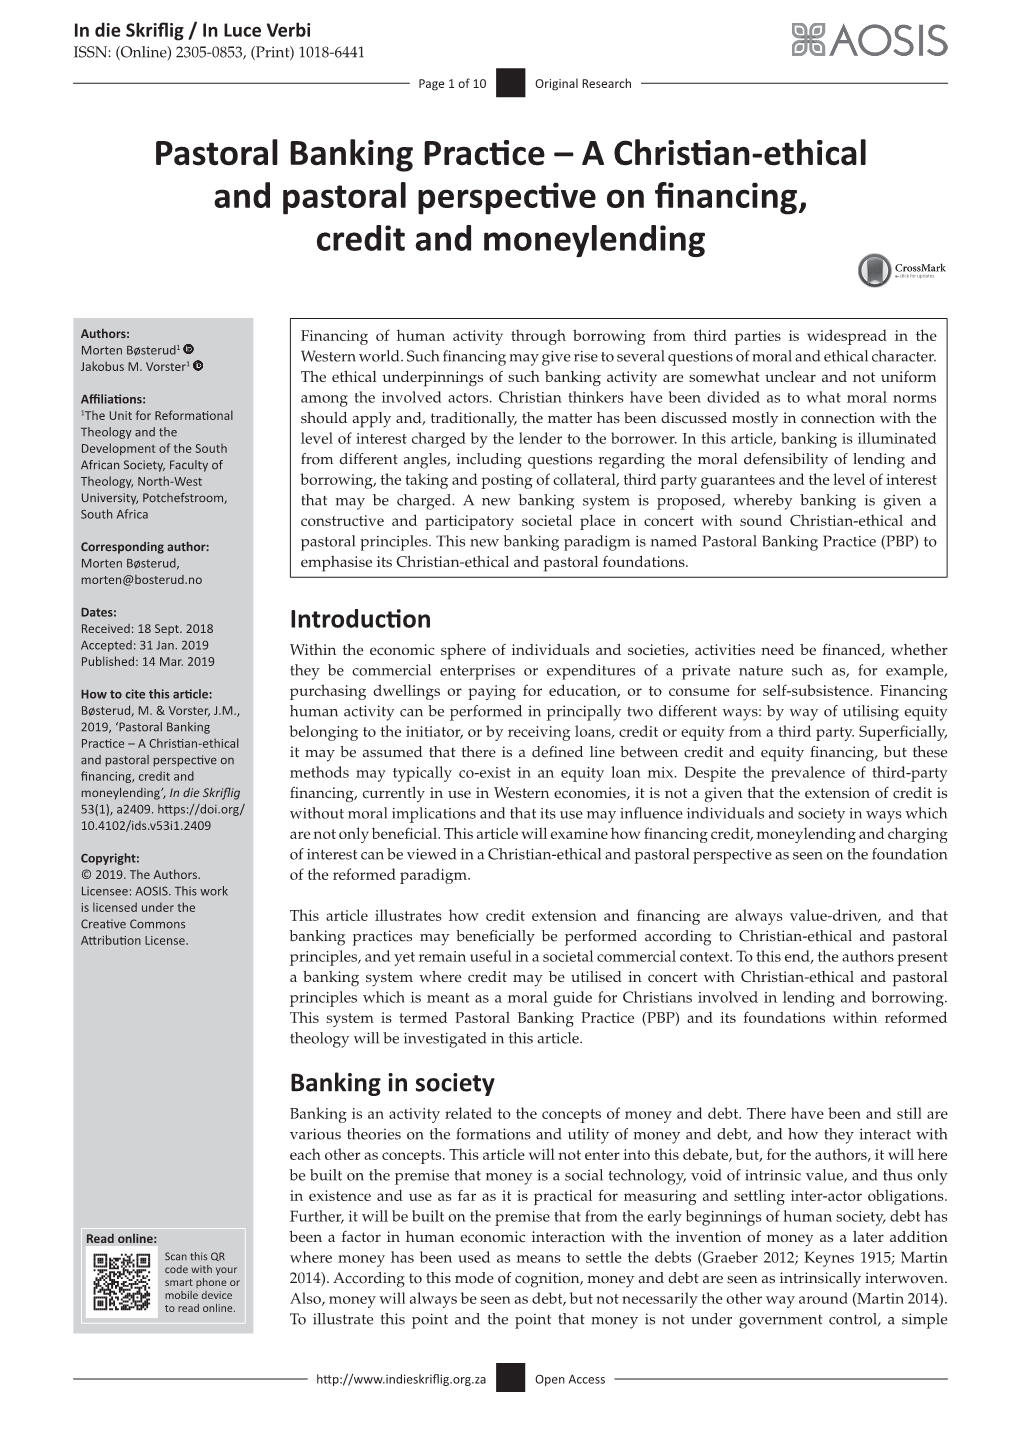 A Christian-Ethical and Pastoral Perspective on Financing, Credit and Moneylending